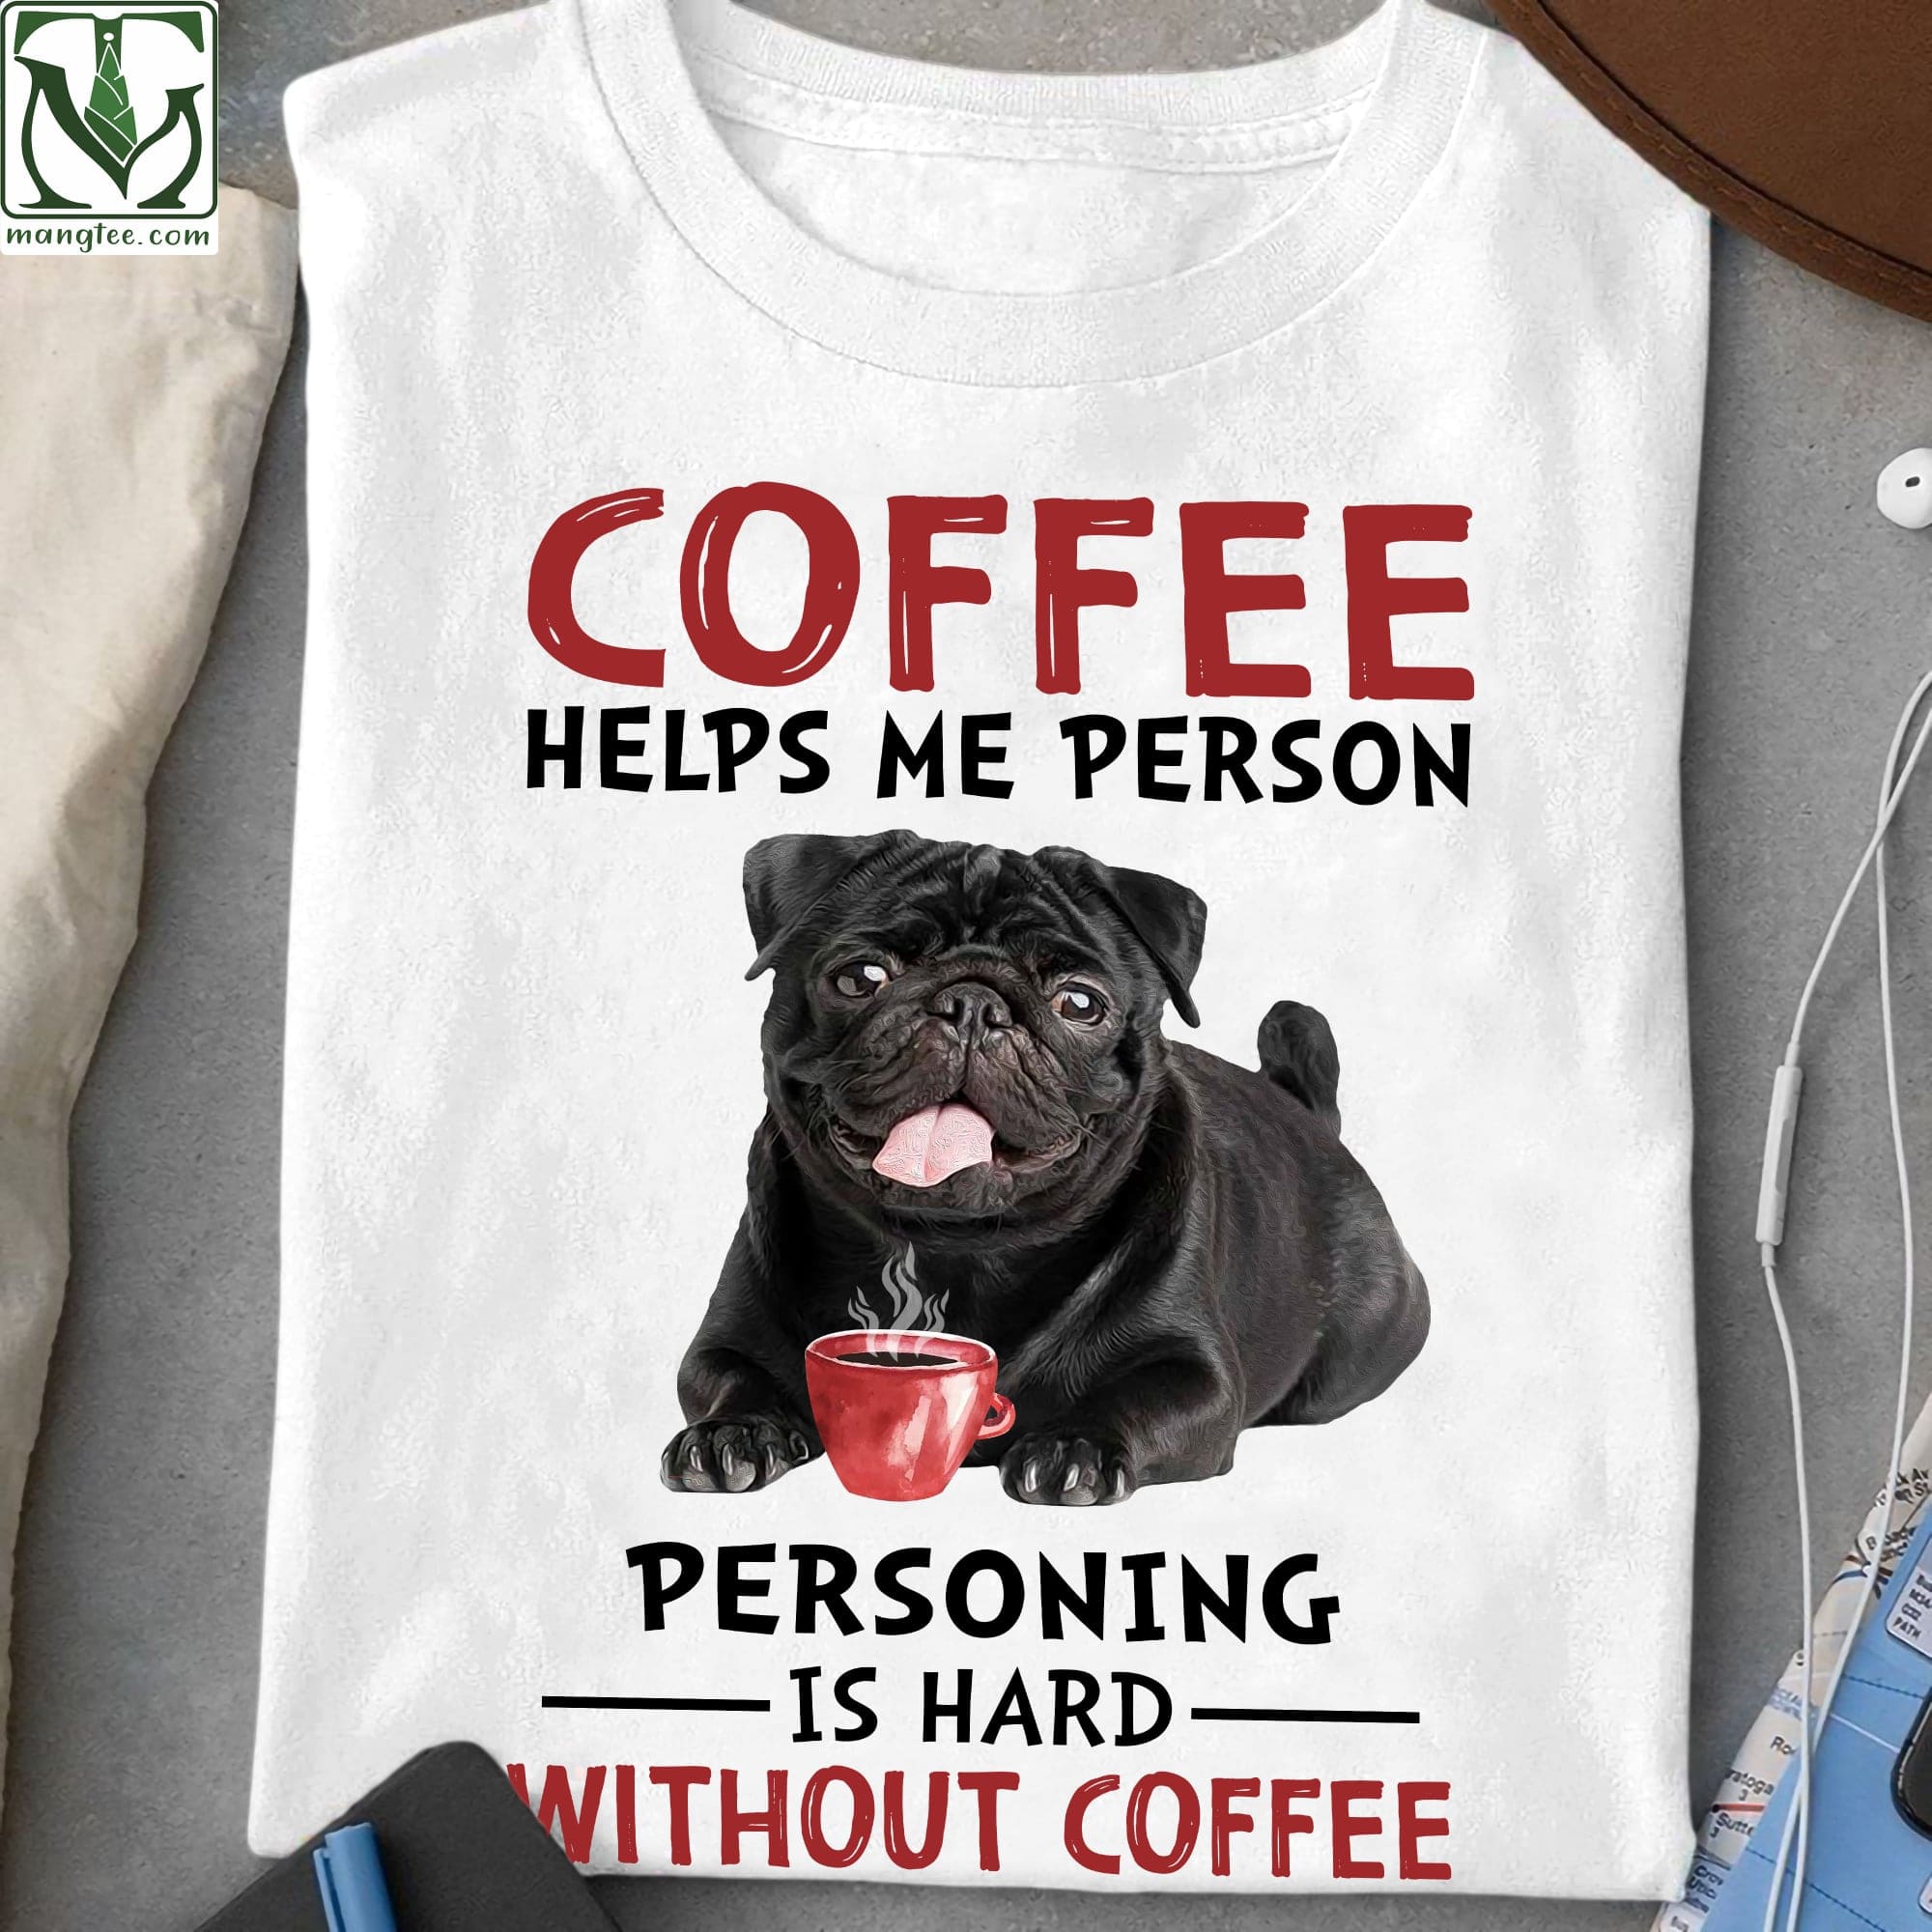 Black Pug Coffee - Coffee helps me person personing is hard without coffee